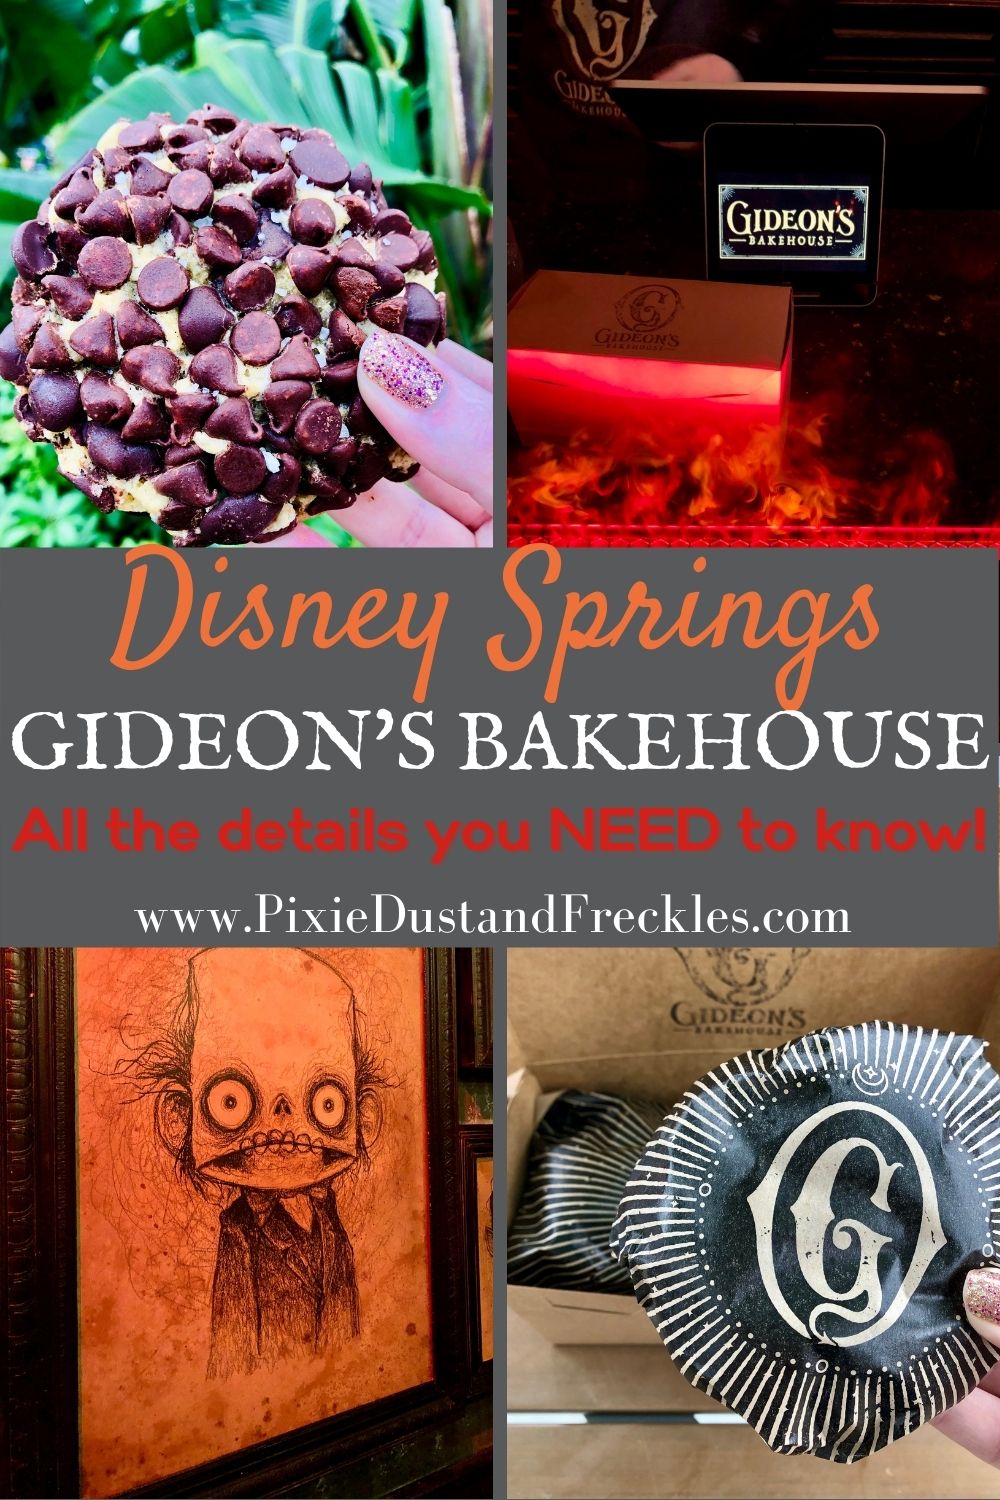 Disney Springs: Gideon's Bakehouse - All the details you need to know!